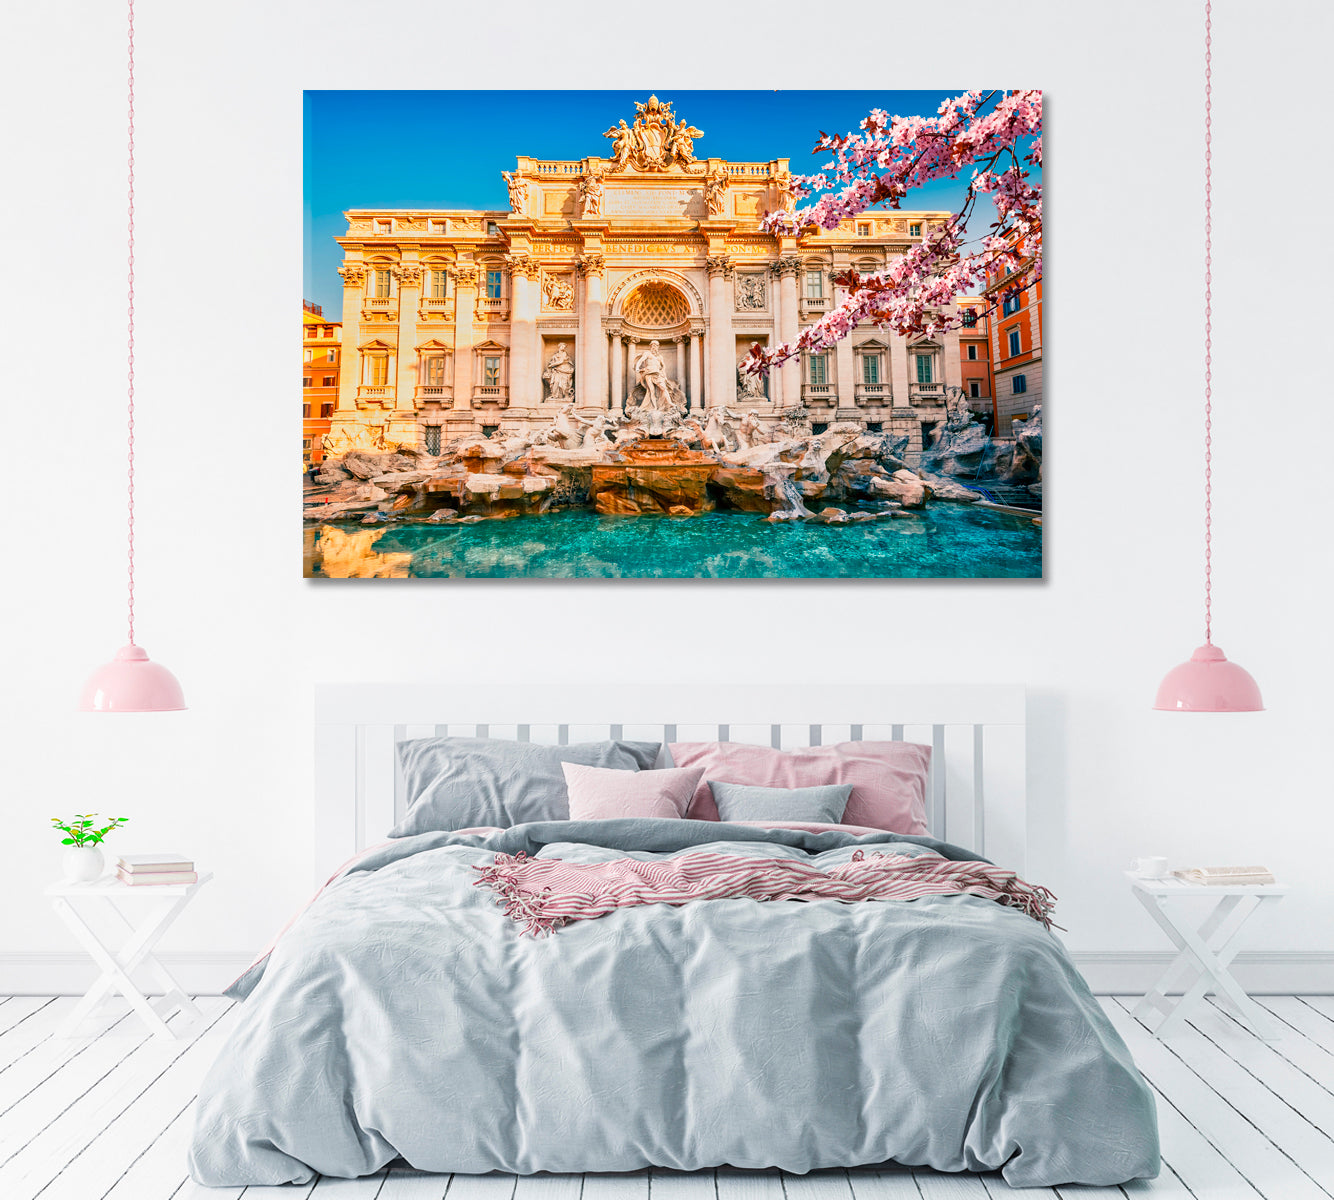 Trevi Fountain Rome Italy Canvas Print ArtLexy 1 Panel 24"x16" inches 